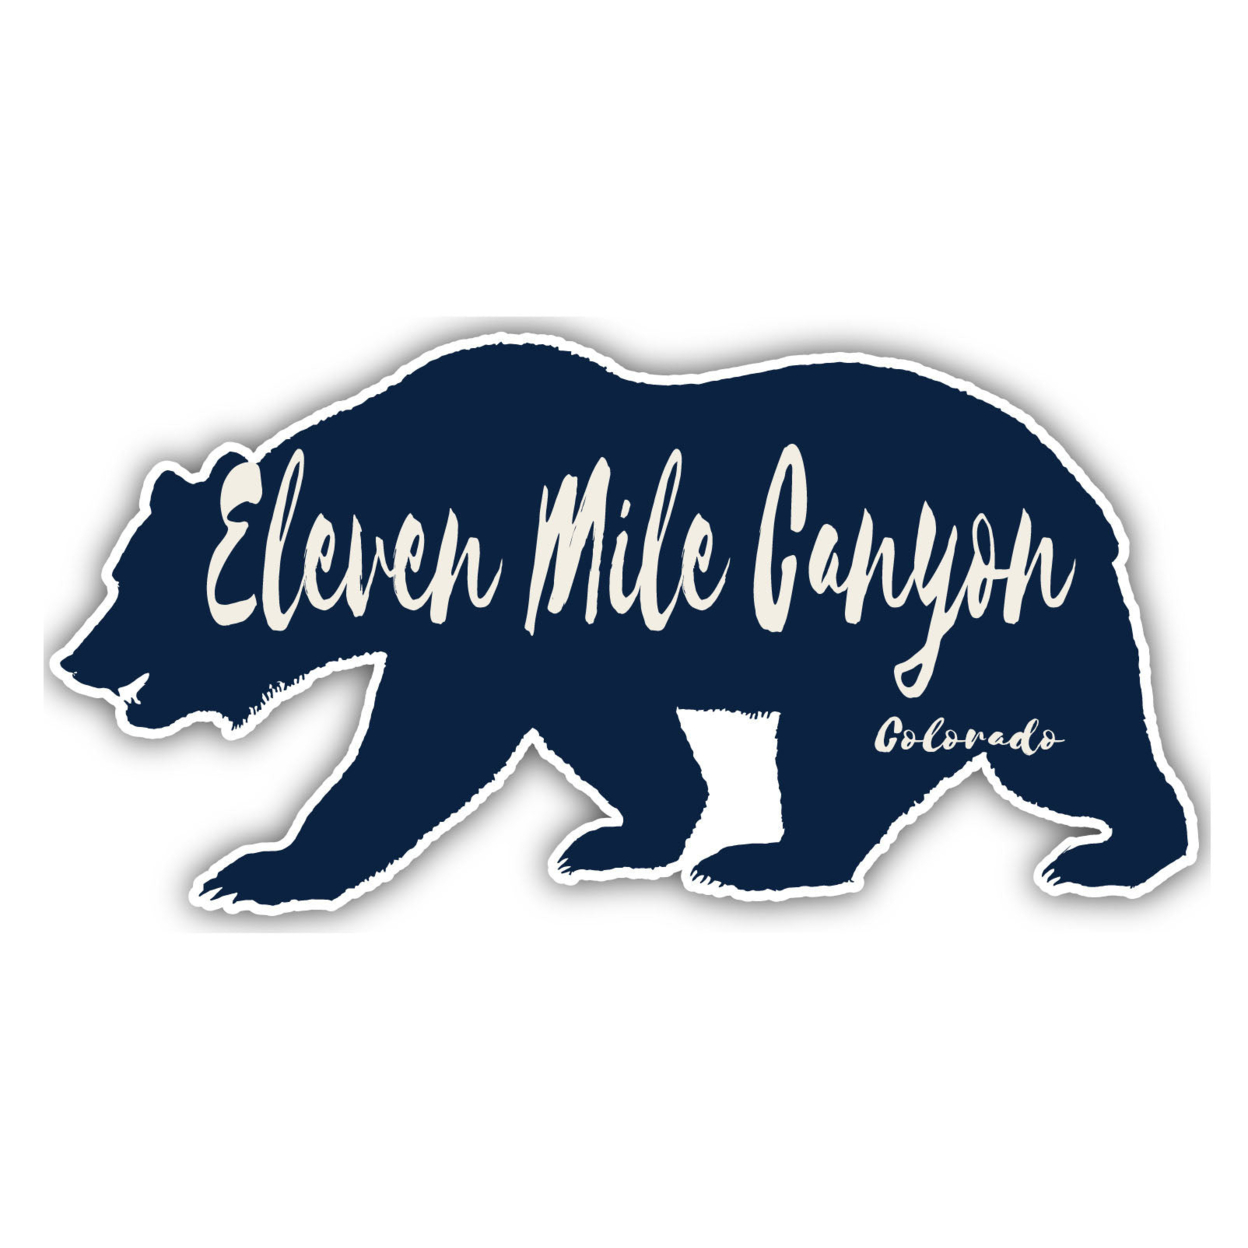 Eleven Mile Canyon Colorado Souvenir Decorative Stickers (Choose Theme And Size) - 4-Pack, 2-Inch, Bear